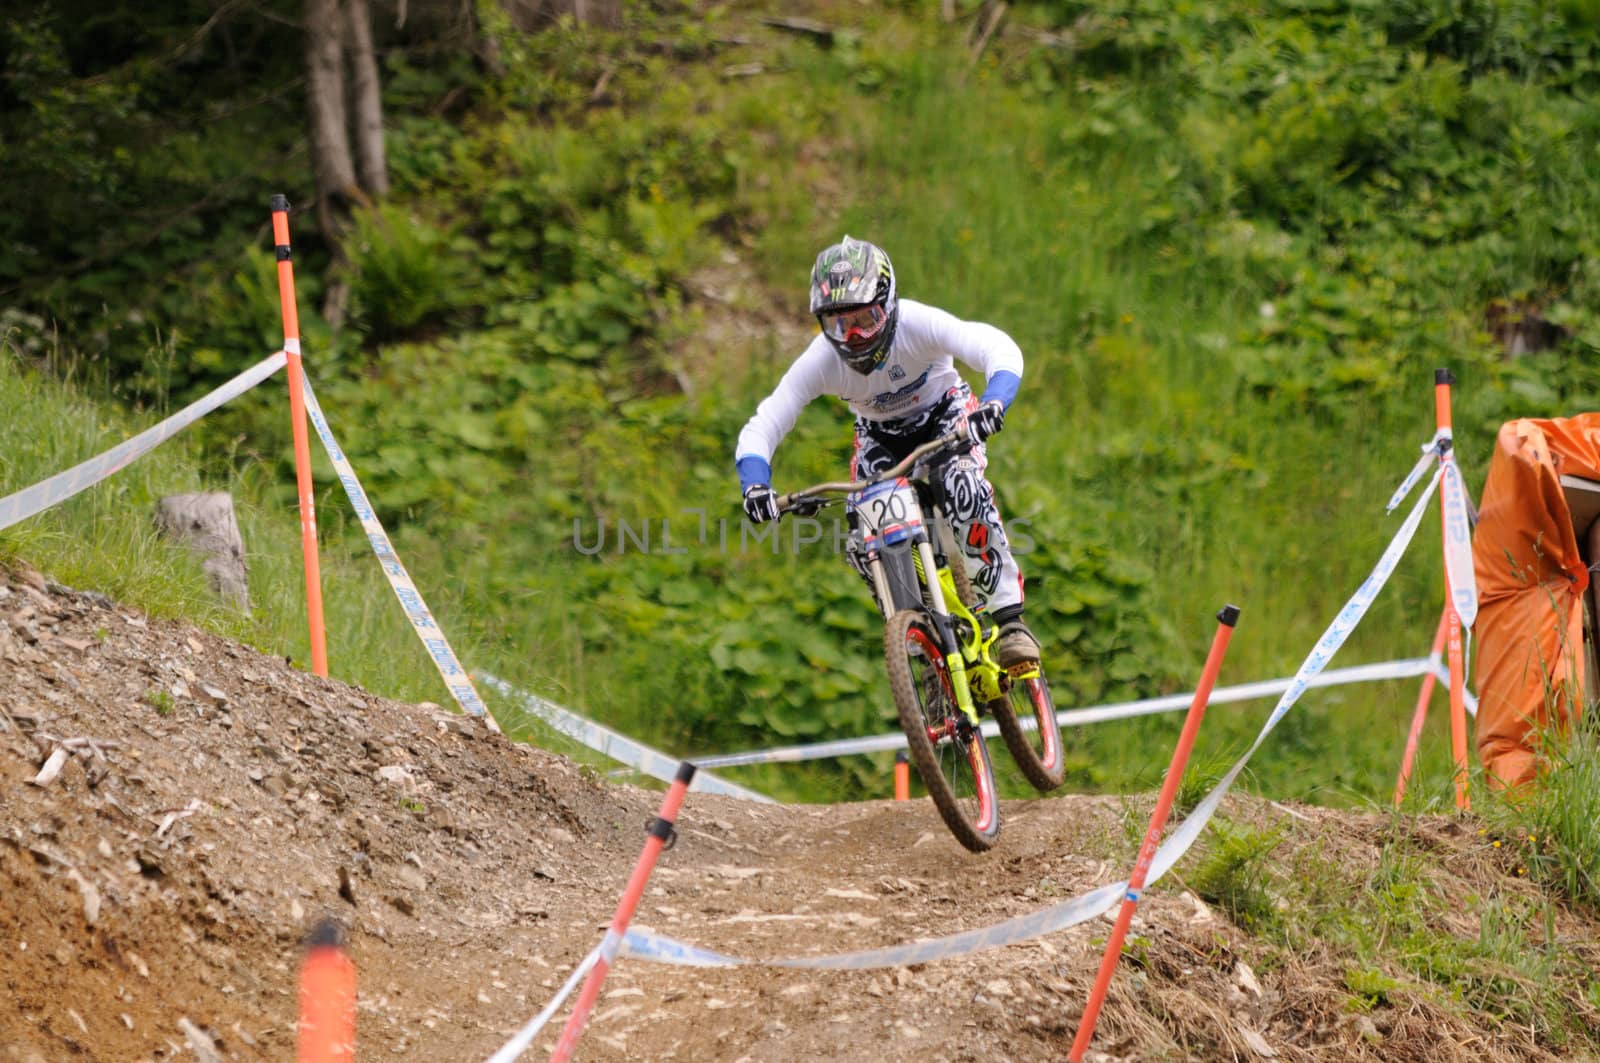 LEOGANG, AUSTRIA - JUN 12: UCI Mountain bike world cup. Troy Brosnan (AUS) at the downhill final race on June 12, 2011 in Leogang, Austria.